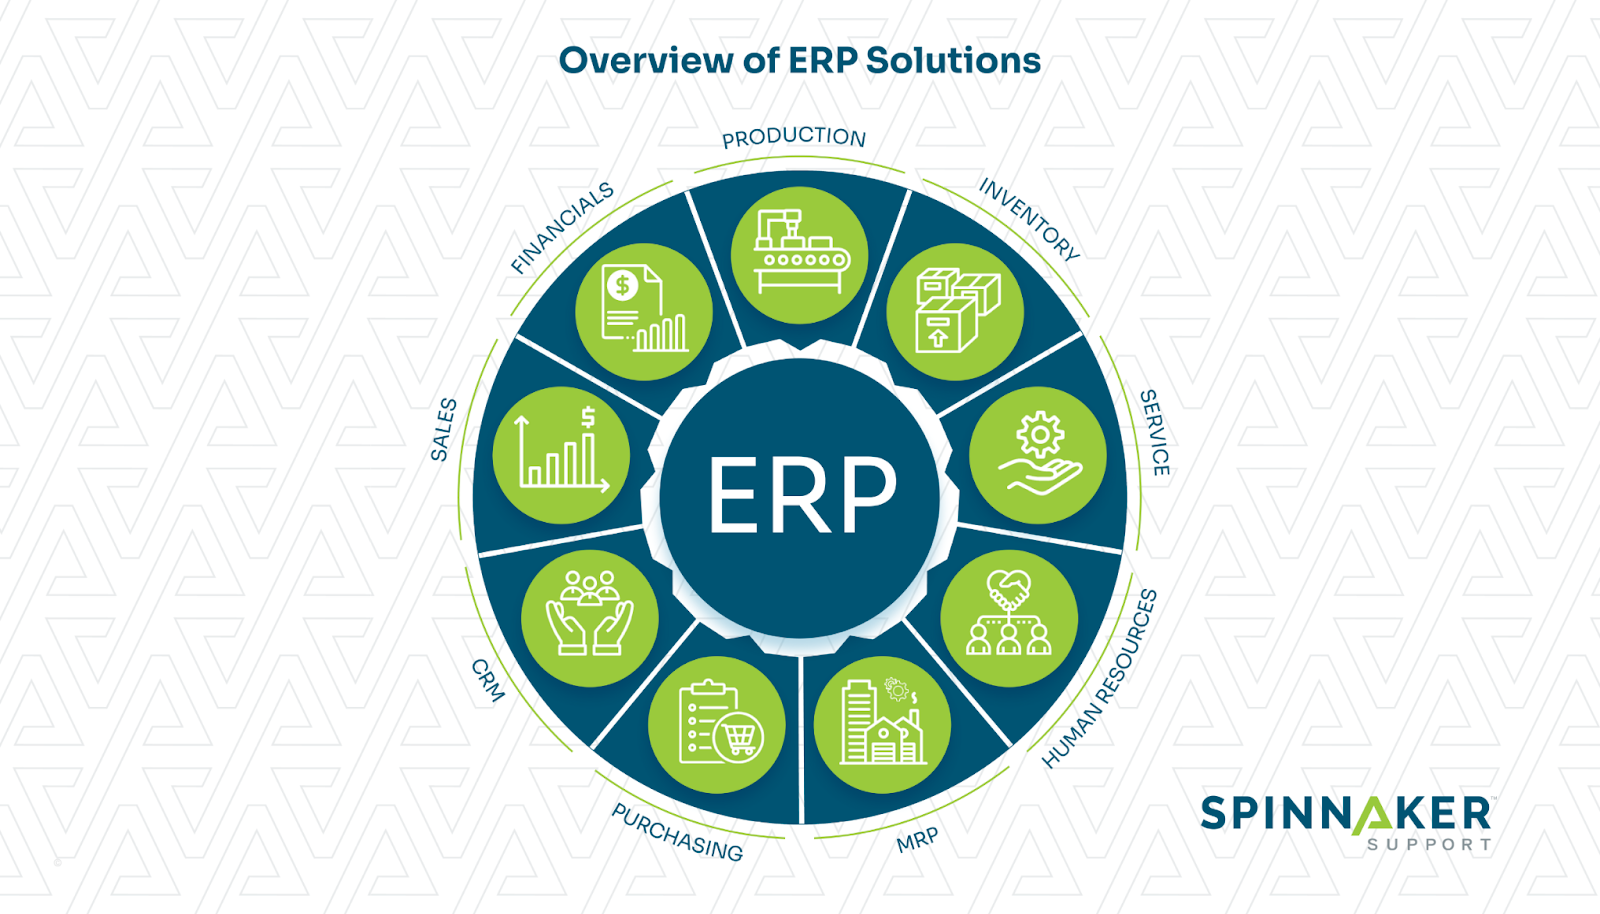 Overview of ERP Solutions